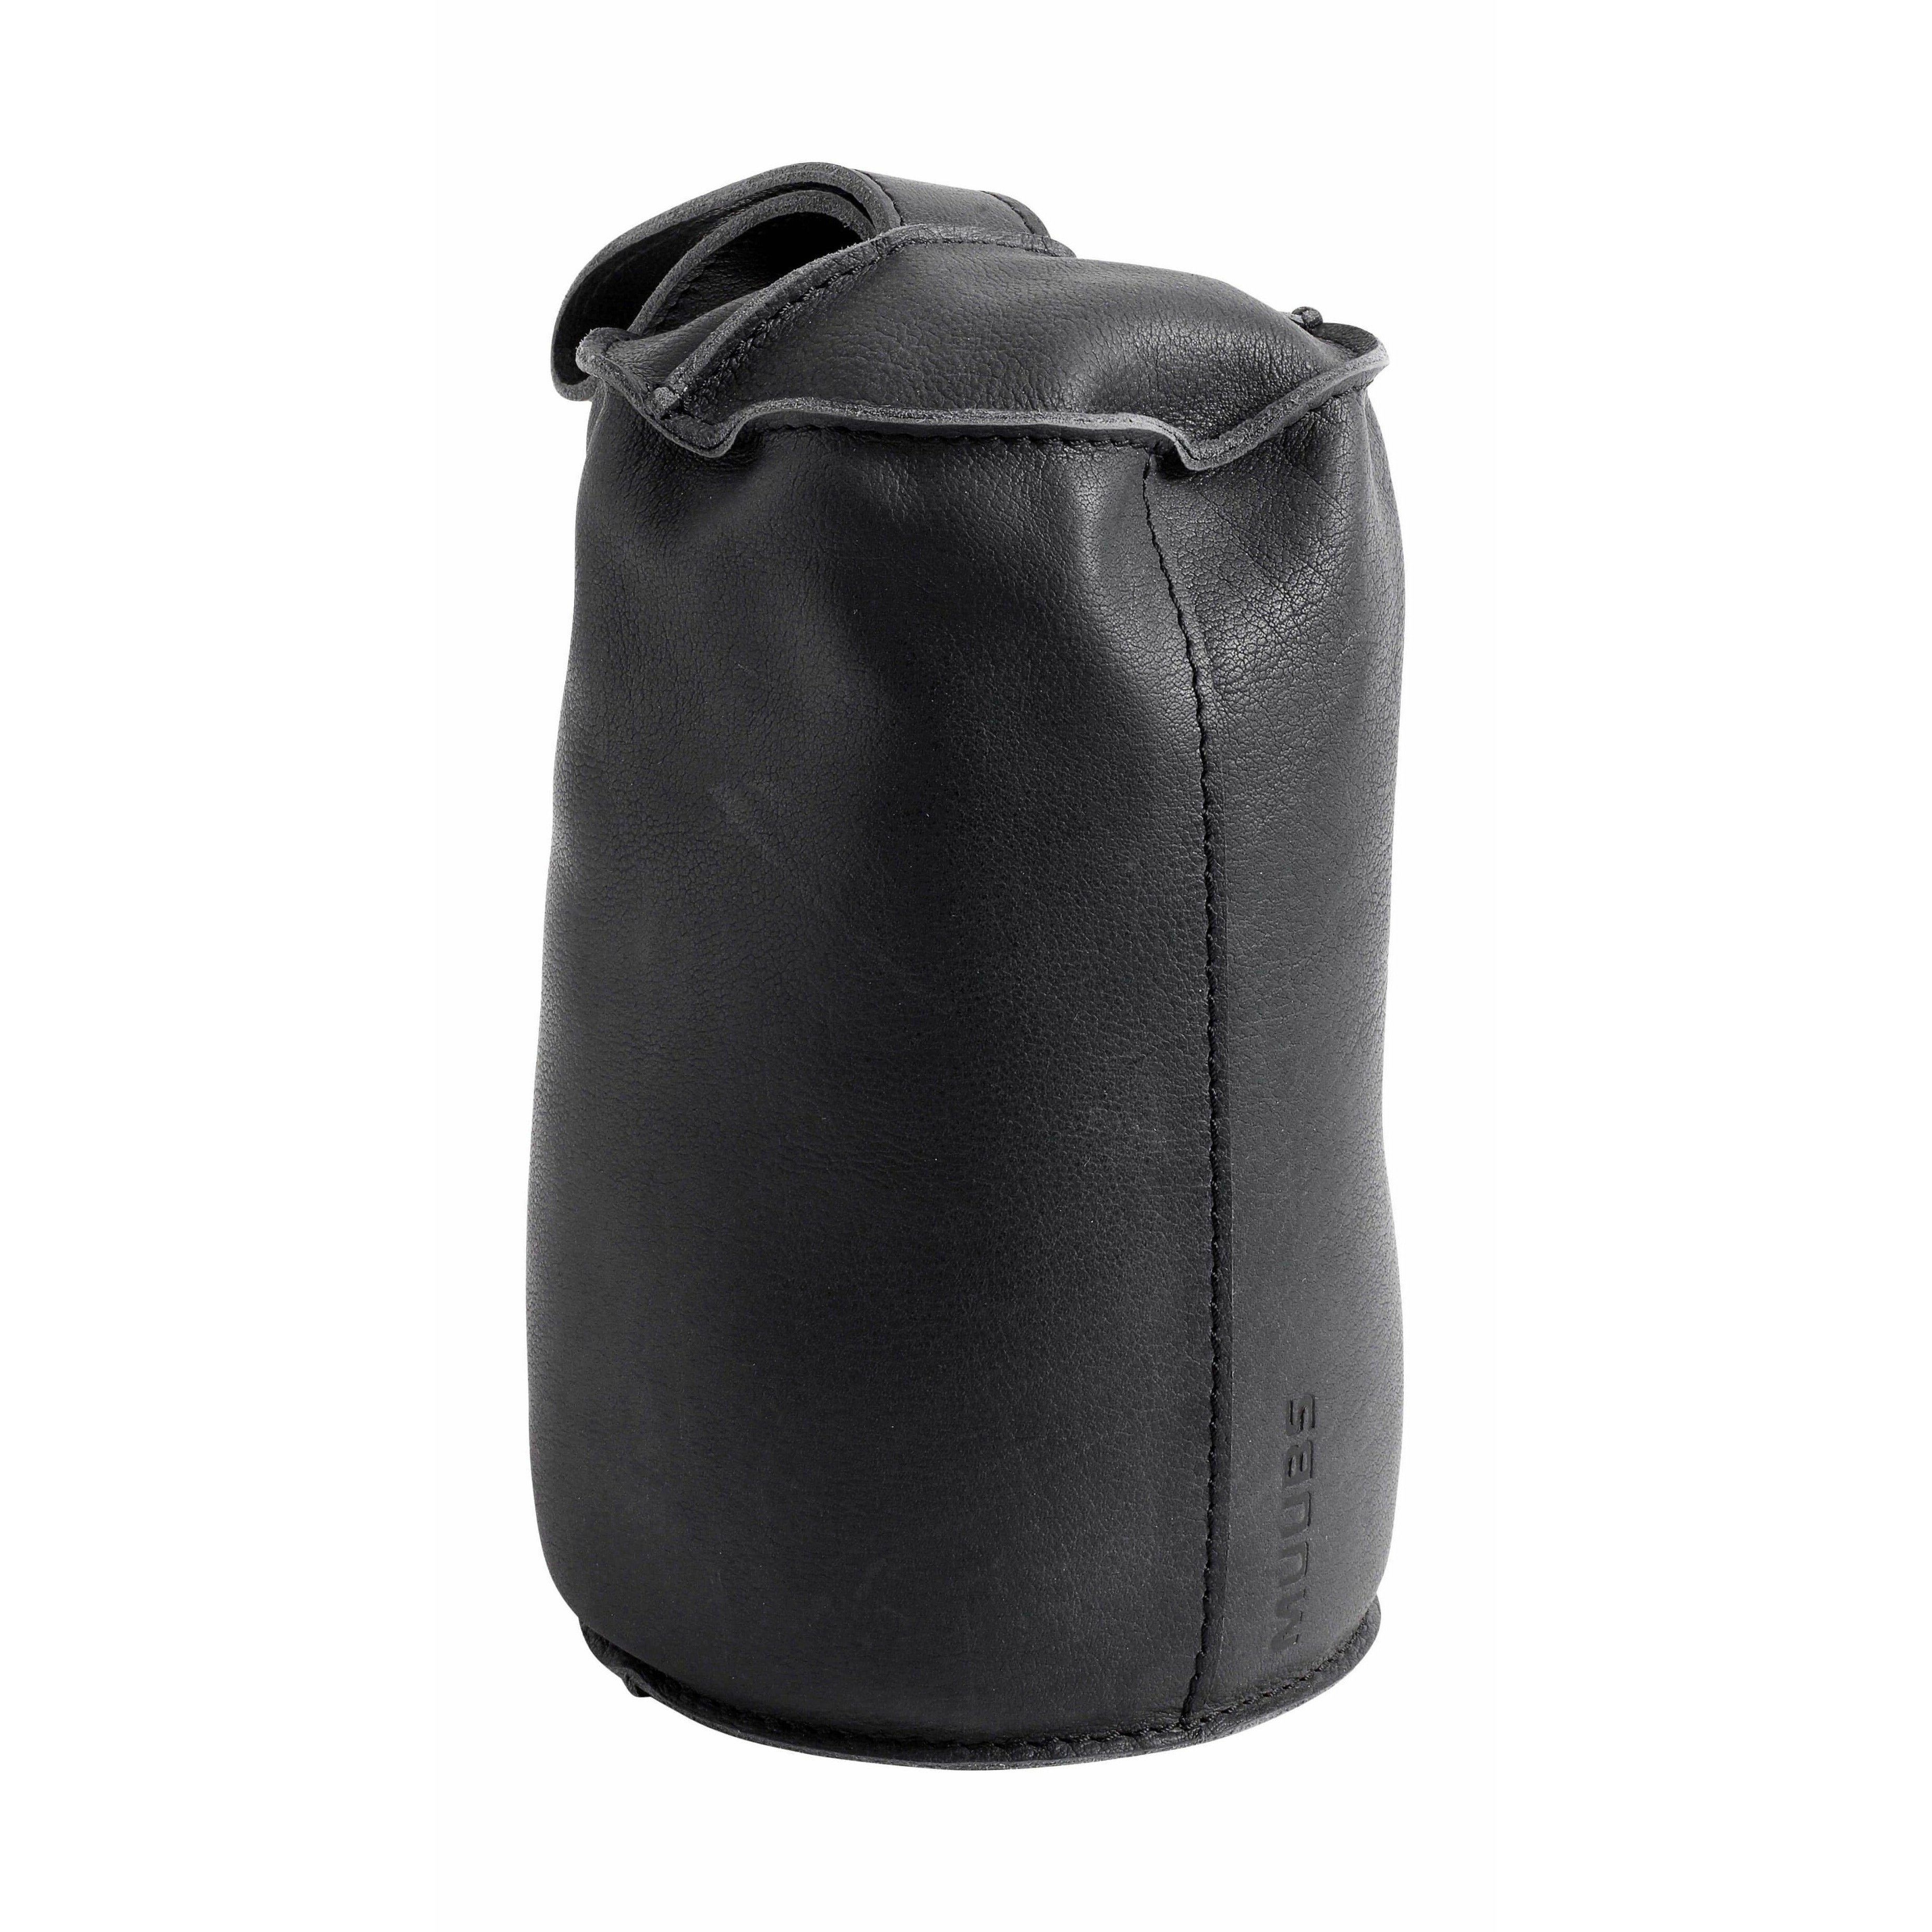 Muubs Camou Doorstop 3 Kg 20cm, Black Leather